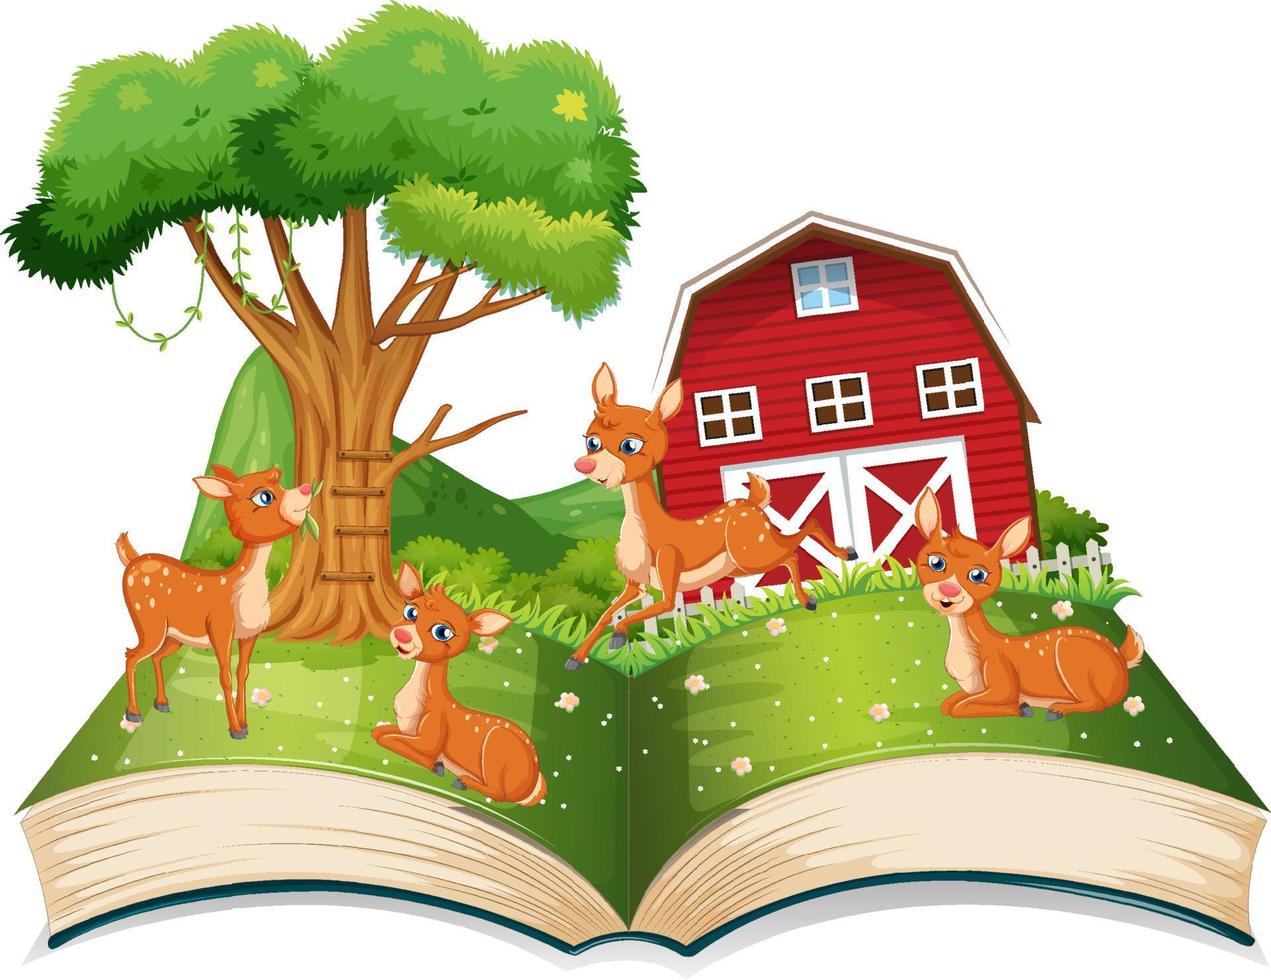 Storybook with deers in the farmyard vector